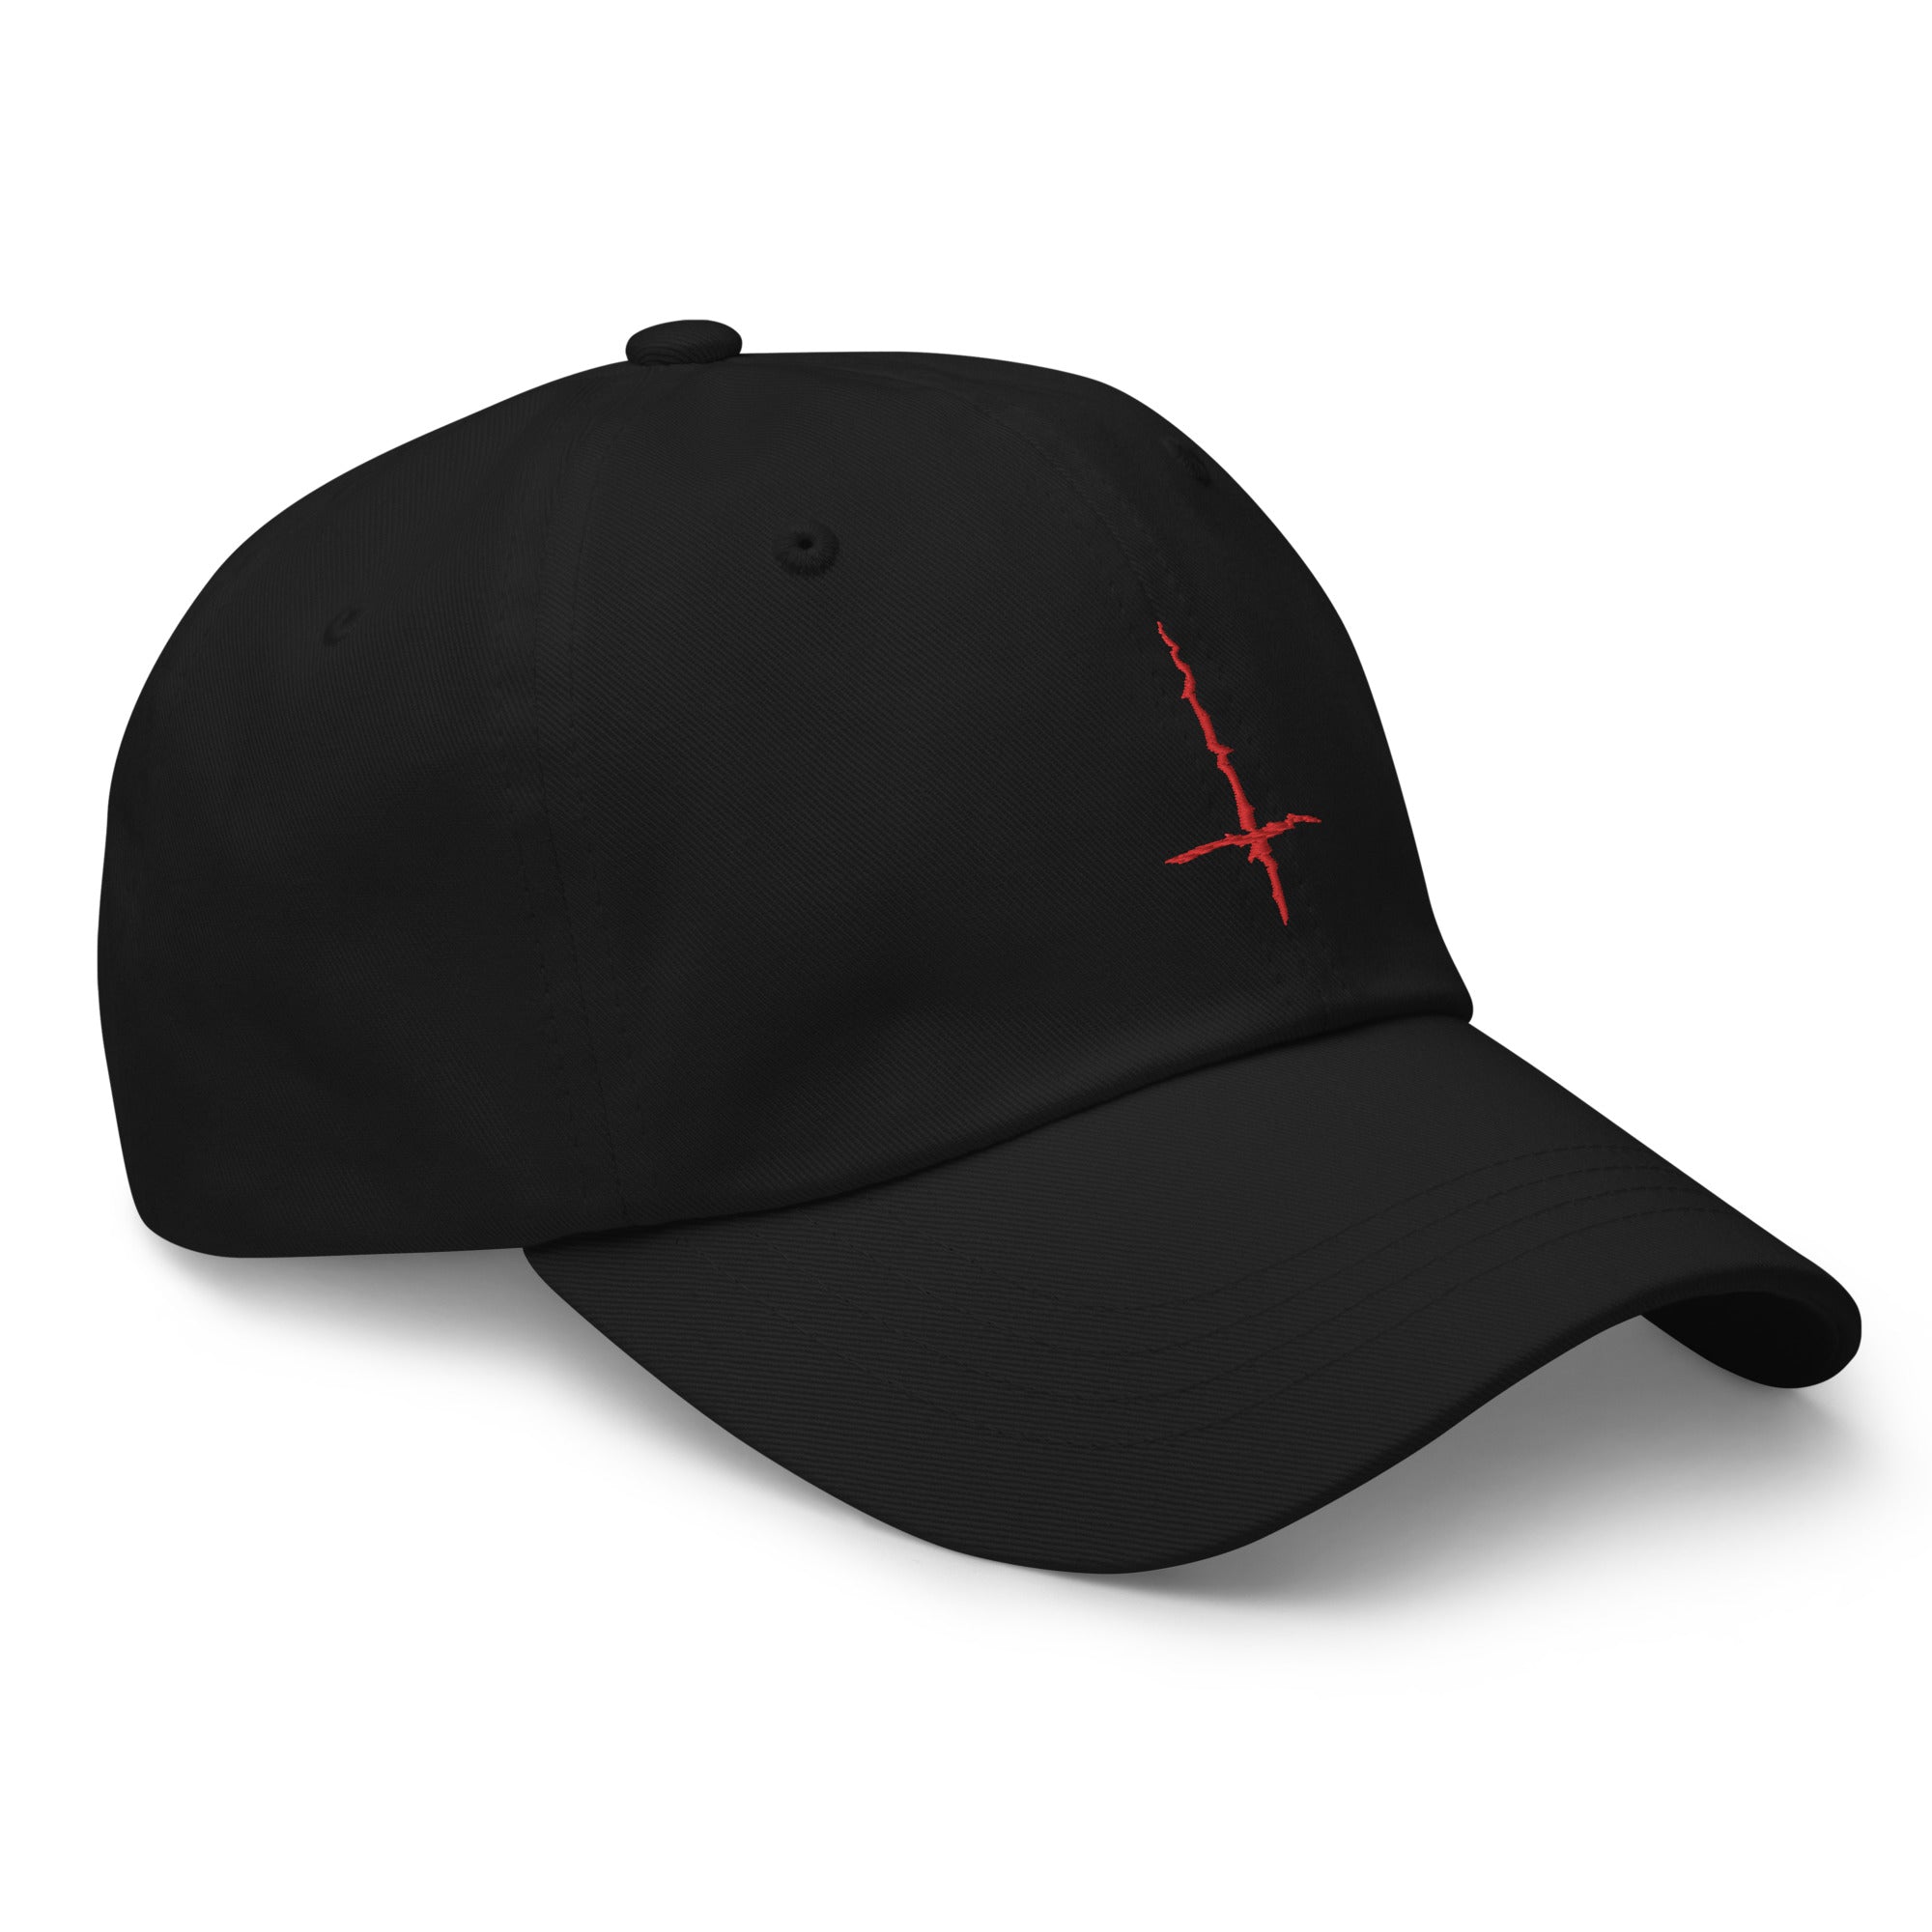 Black Metal Style Inverted Cross Embroidered Baseball Cap Red Thread Dad hat - Edge of Life Designs